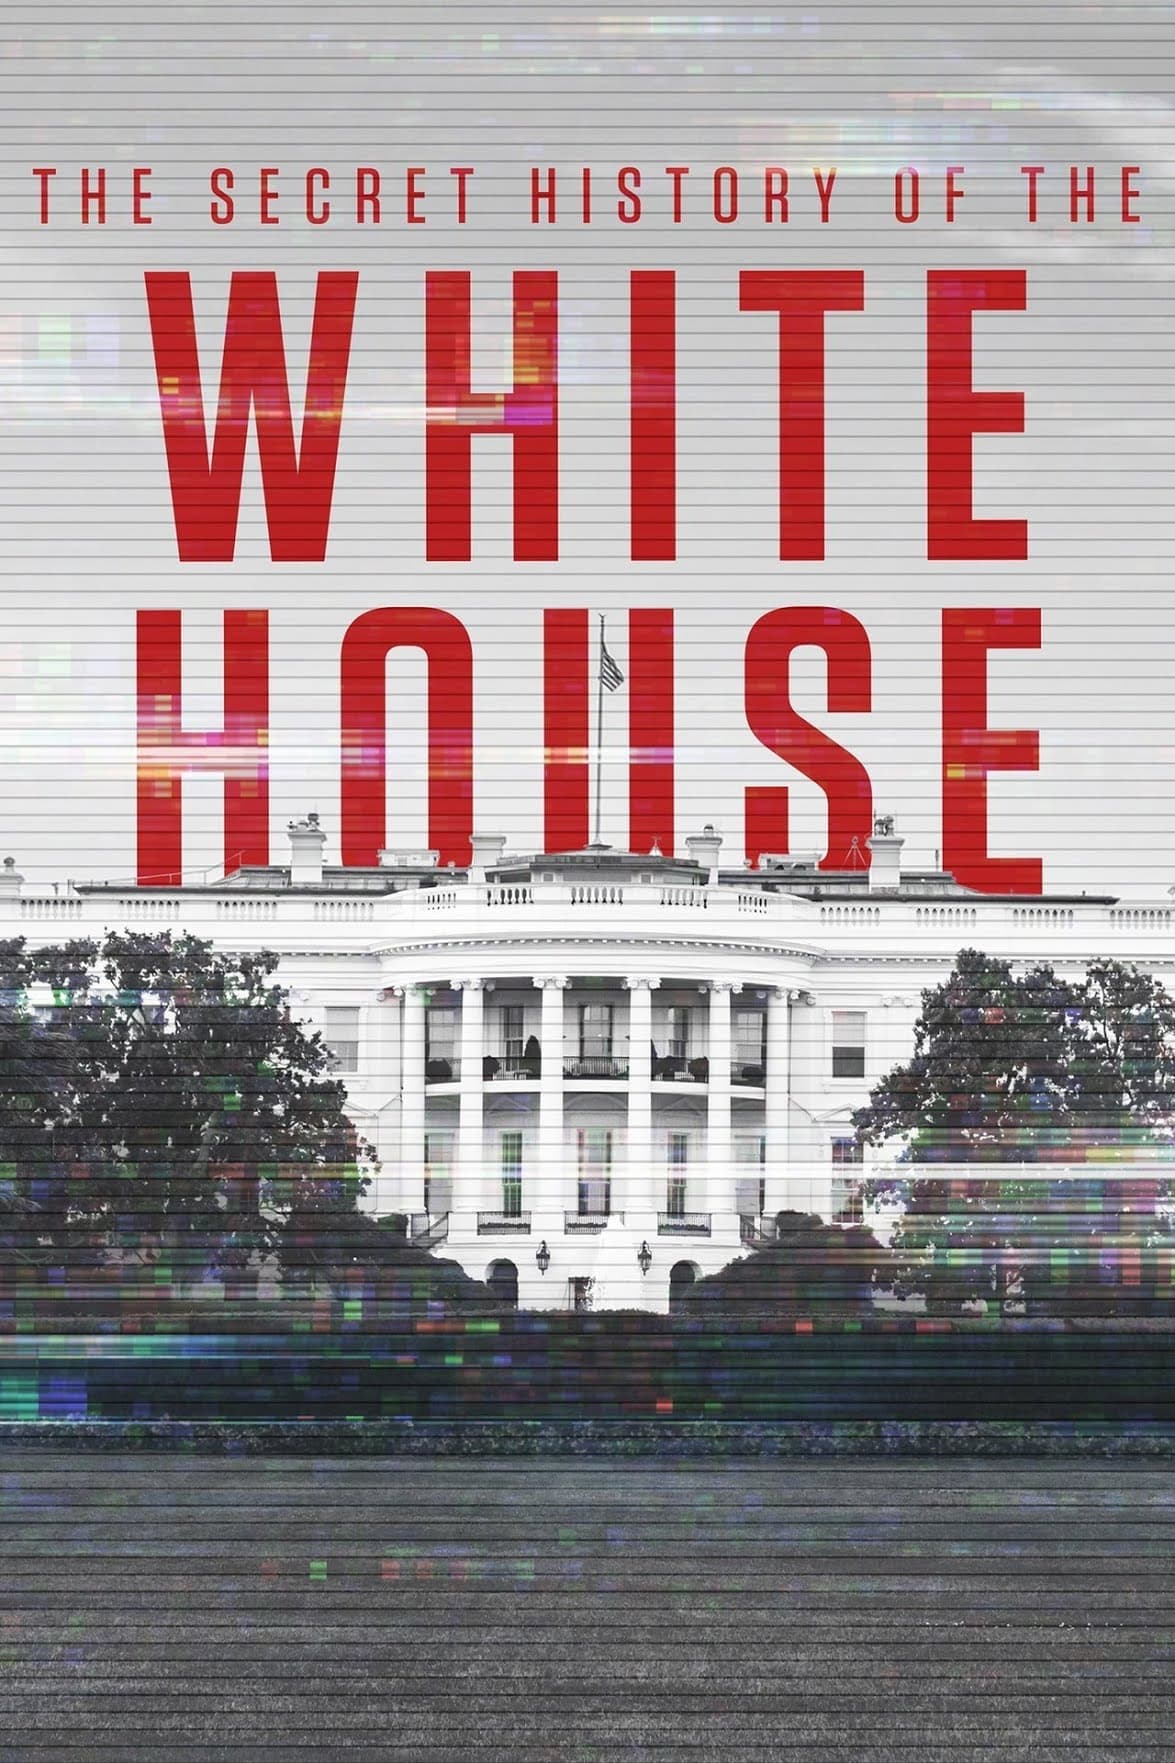 The Secret History of The White House